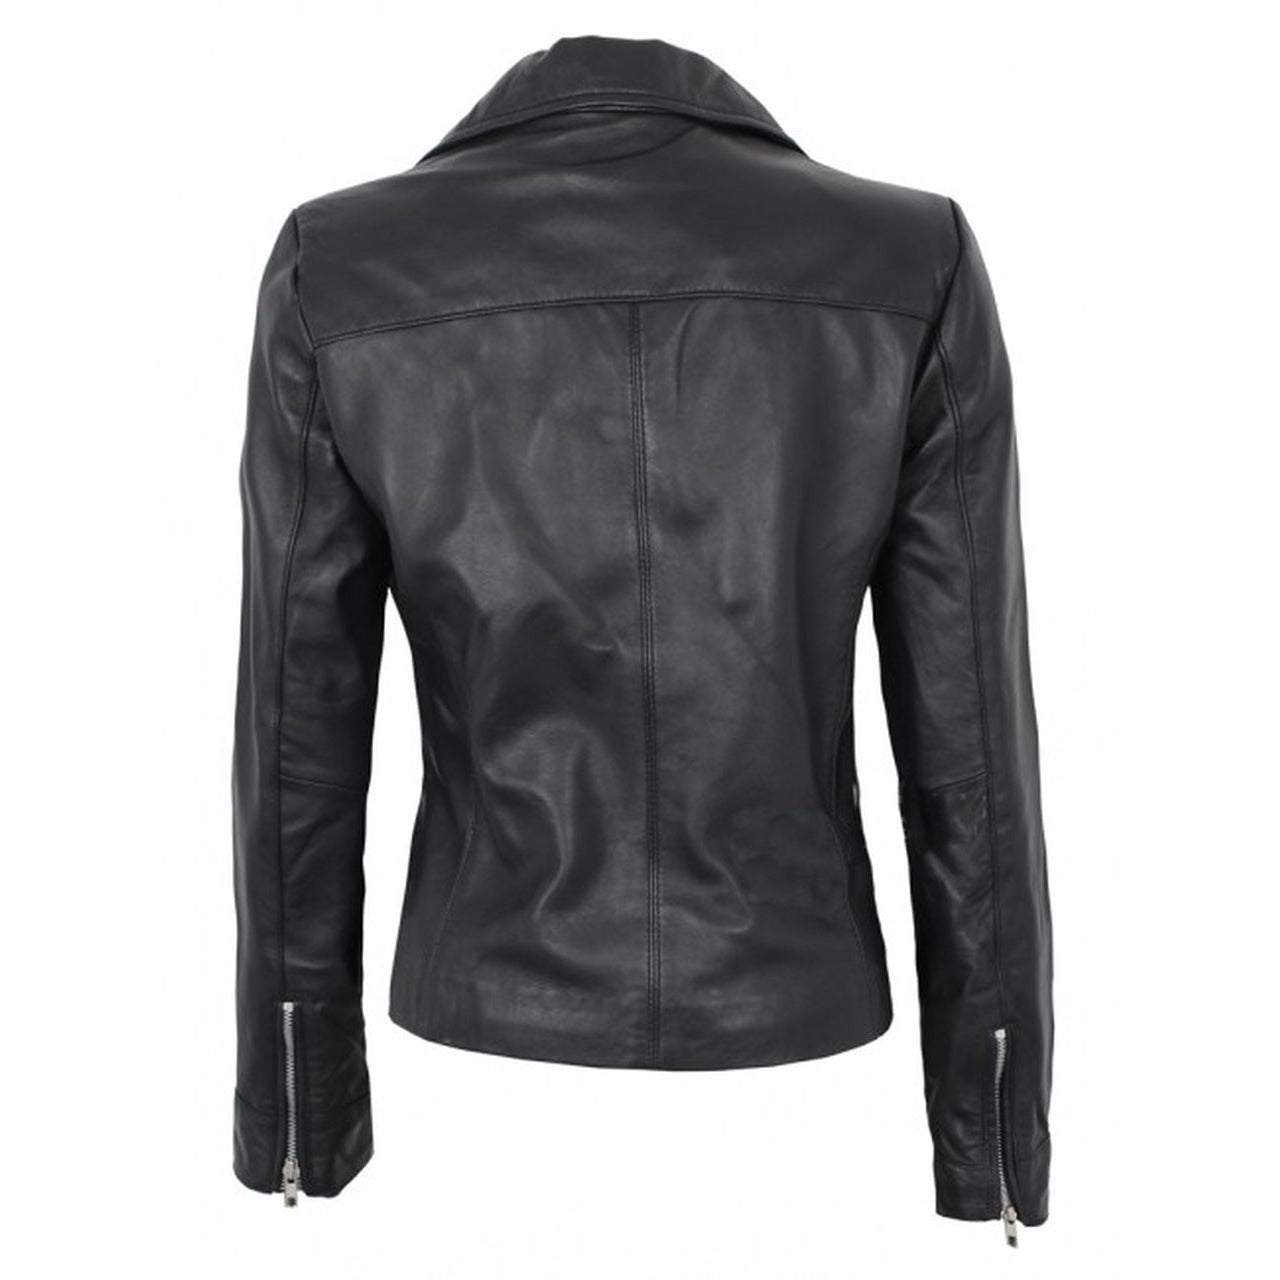 Black Real Leather Jacket For Women | Musheditions